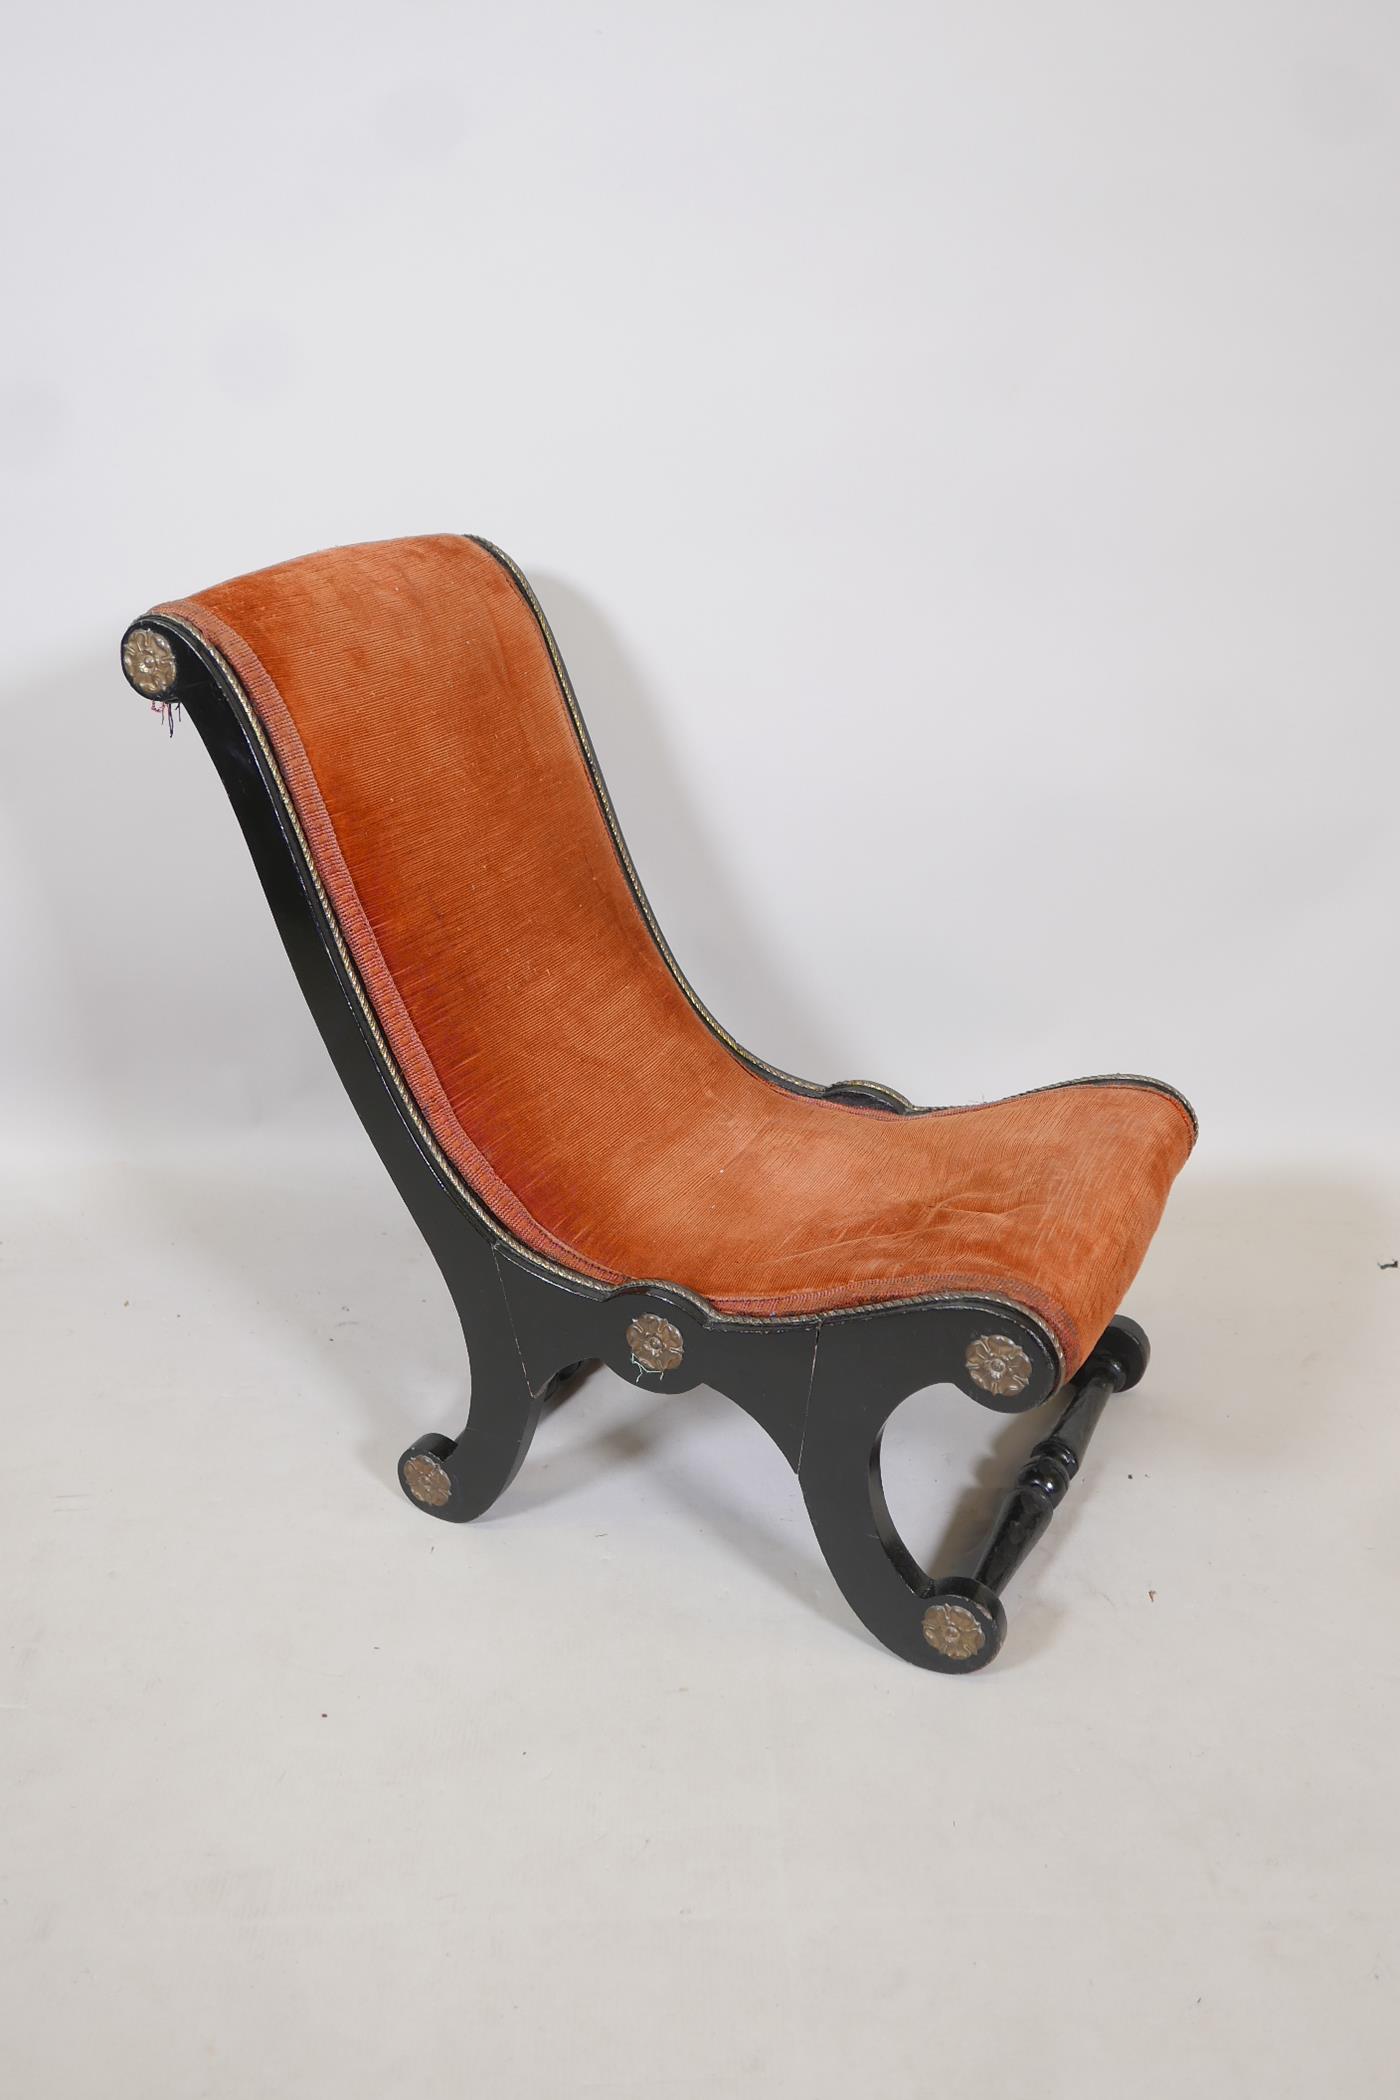 A Victorian ebonised slipper chair, with rust red upholstery and brass decorative motifs and trim,